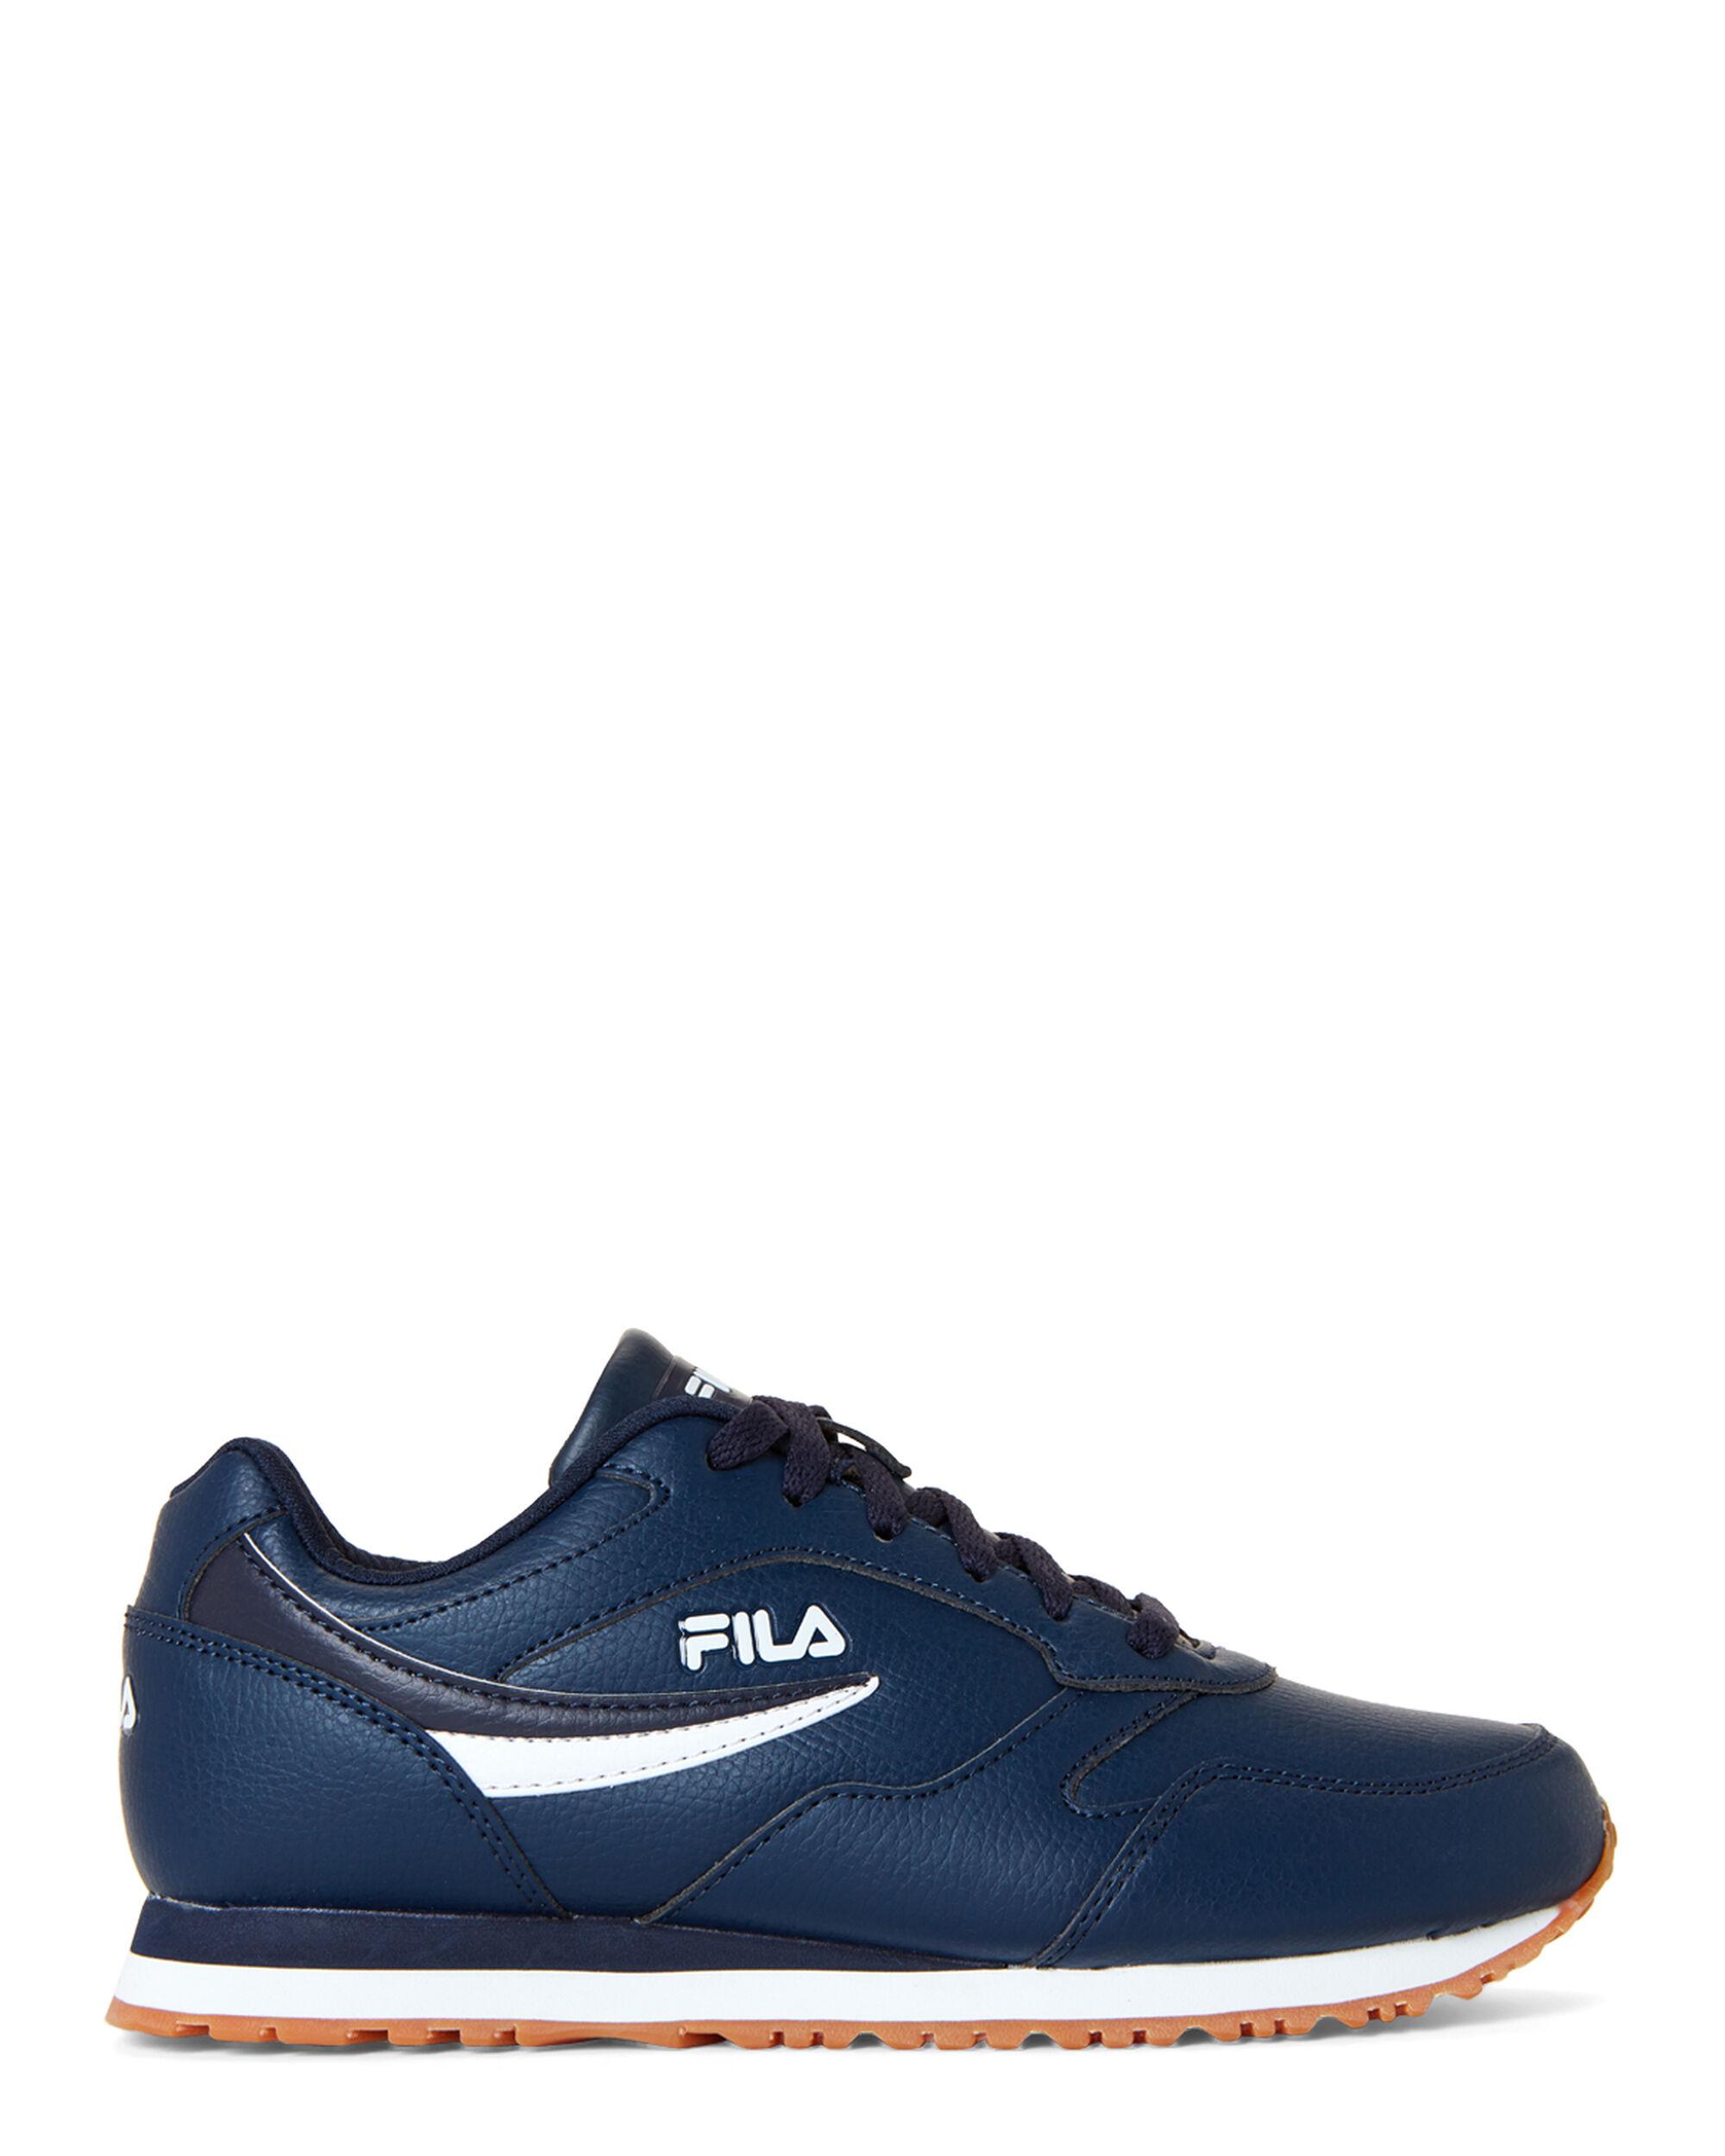 Fila Navy & White Classico 18 Low-top Sneakers in Navy White (Blue) for ...